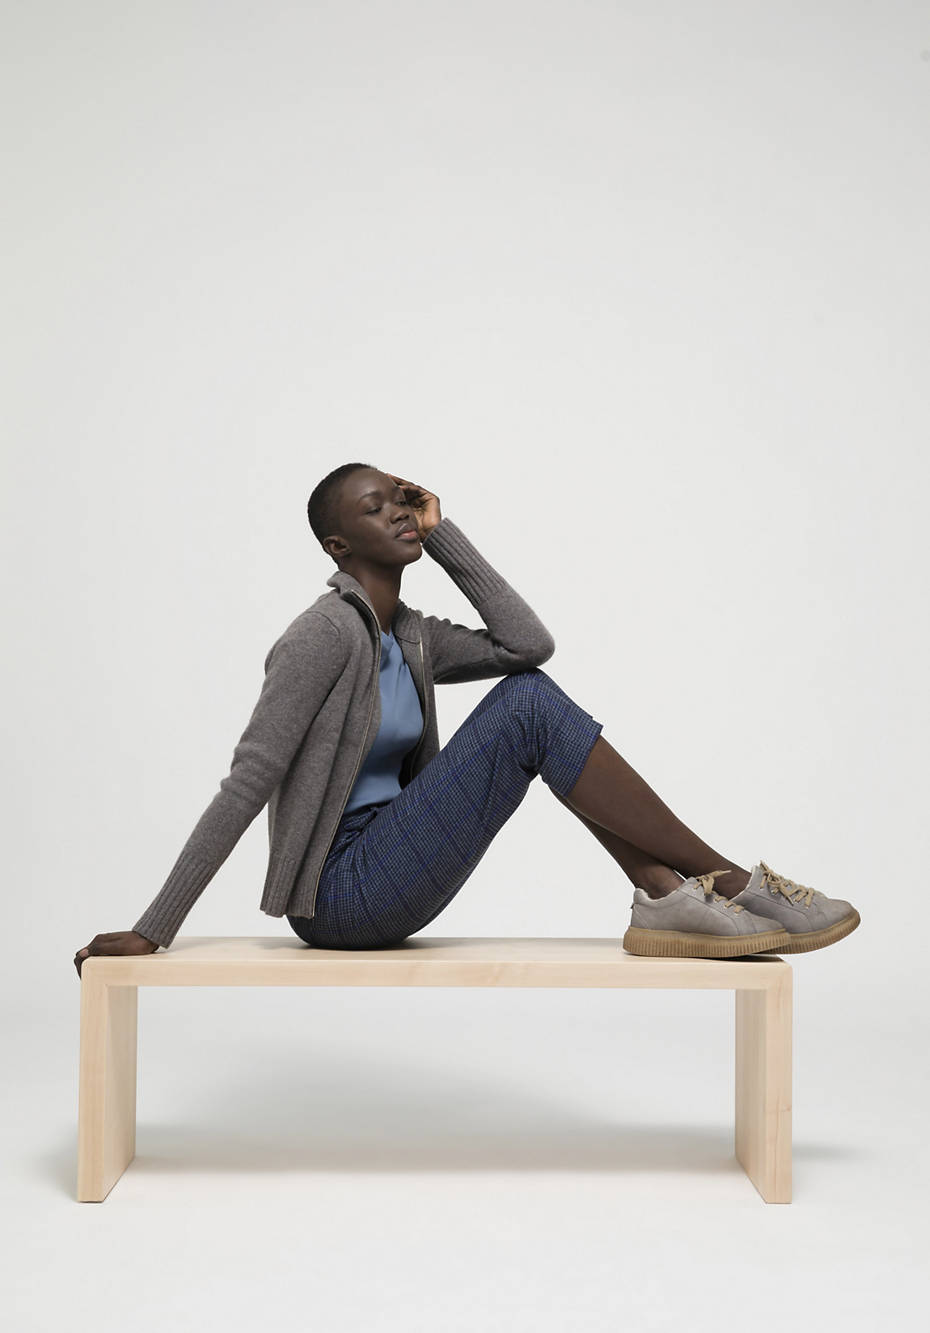 Relaxed fit pants made of pure organic merino wool